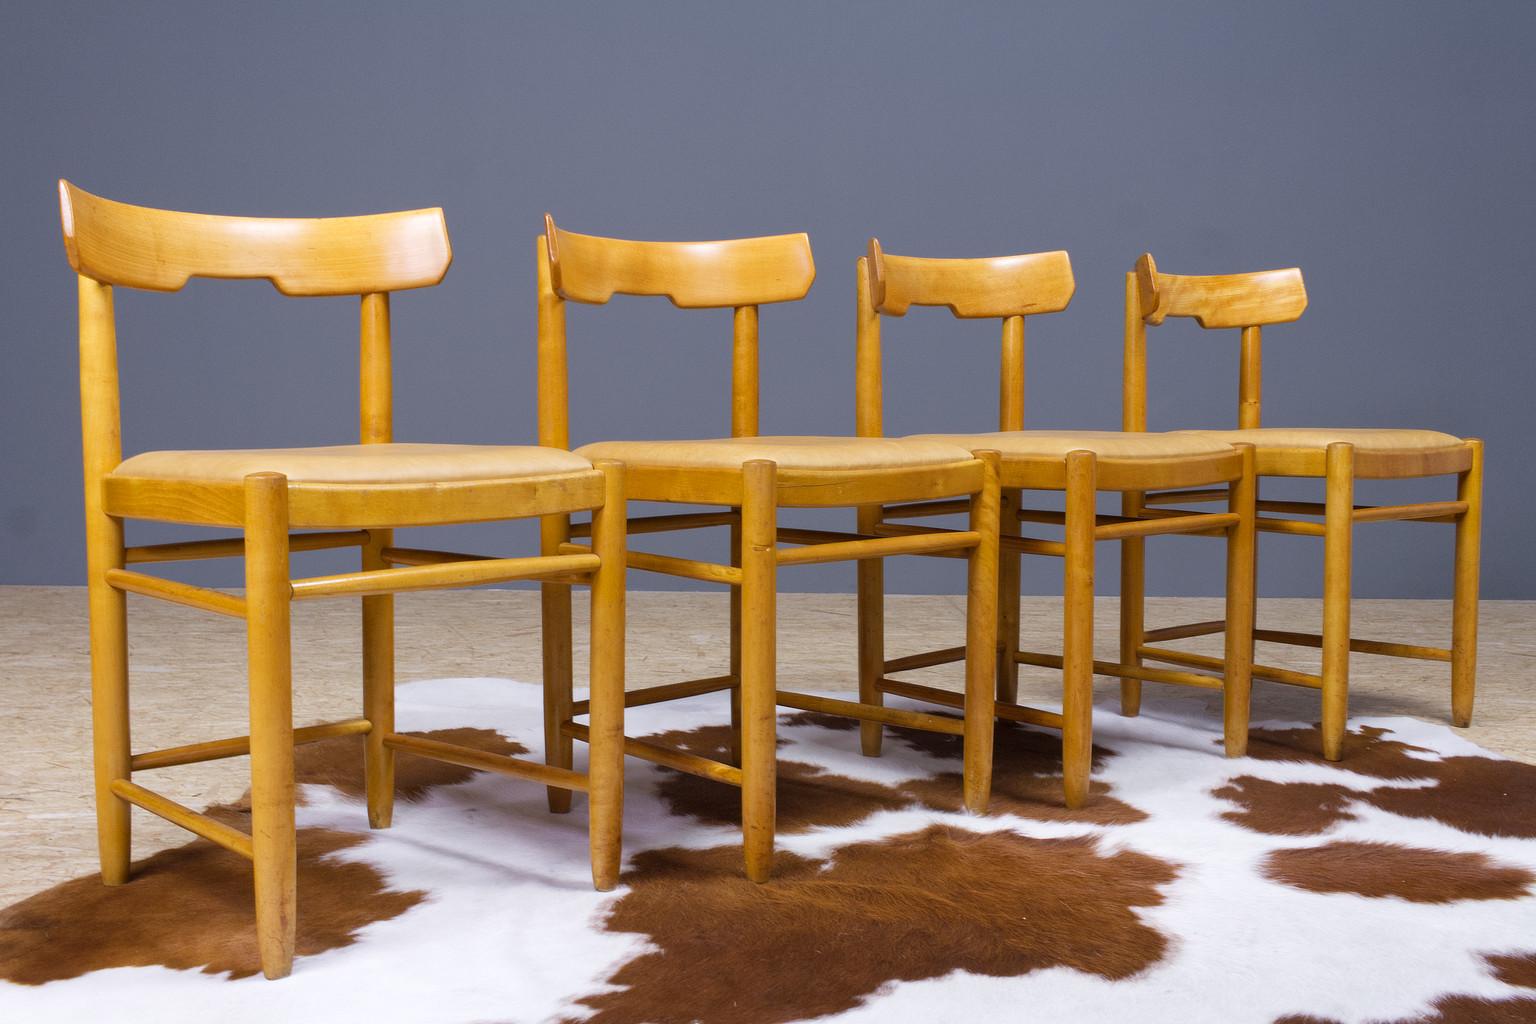 Scandinavian Modern re-upholstered set of 4 beech dining chairs, Danish origin possibly Farstrup. The set is reupholstered in a excellent quality leather, tan colored. No instabilities, great construction of the frames are checked, restored and